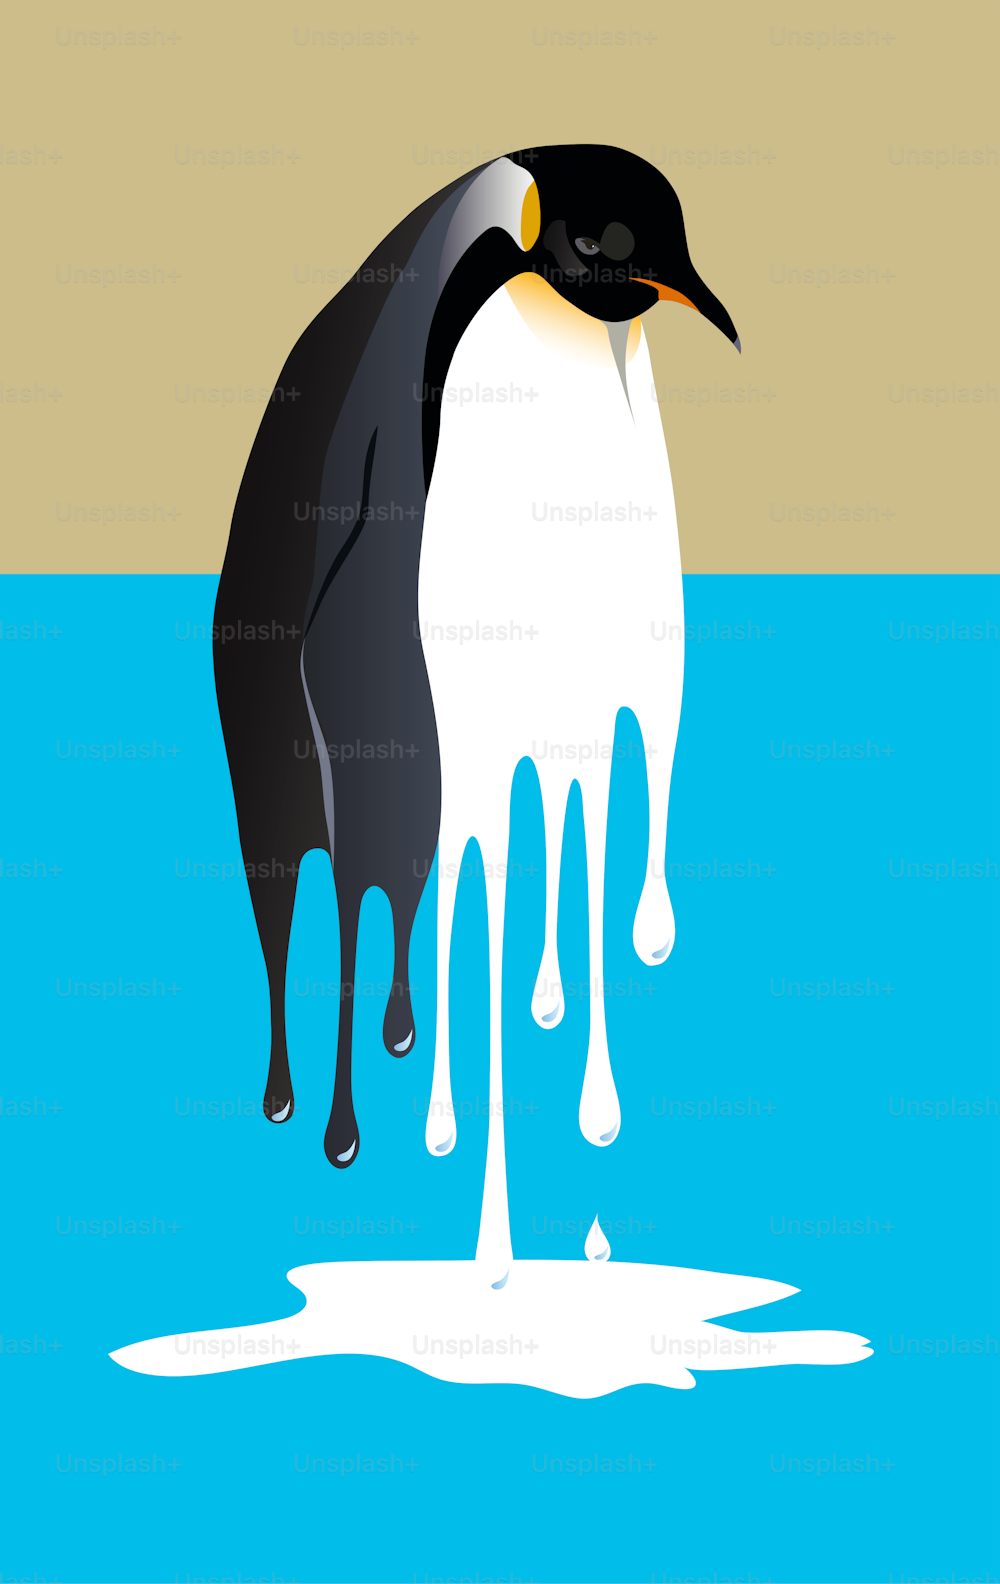 Melting Penguin - global warming may be a disaster for penguins, vector